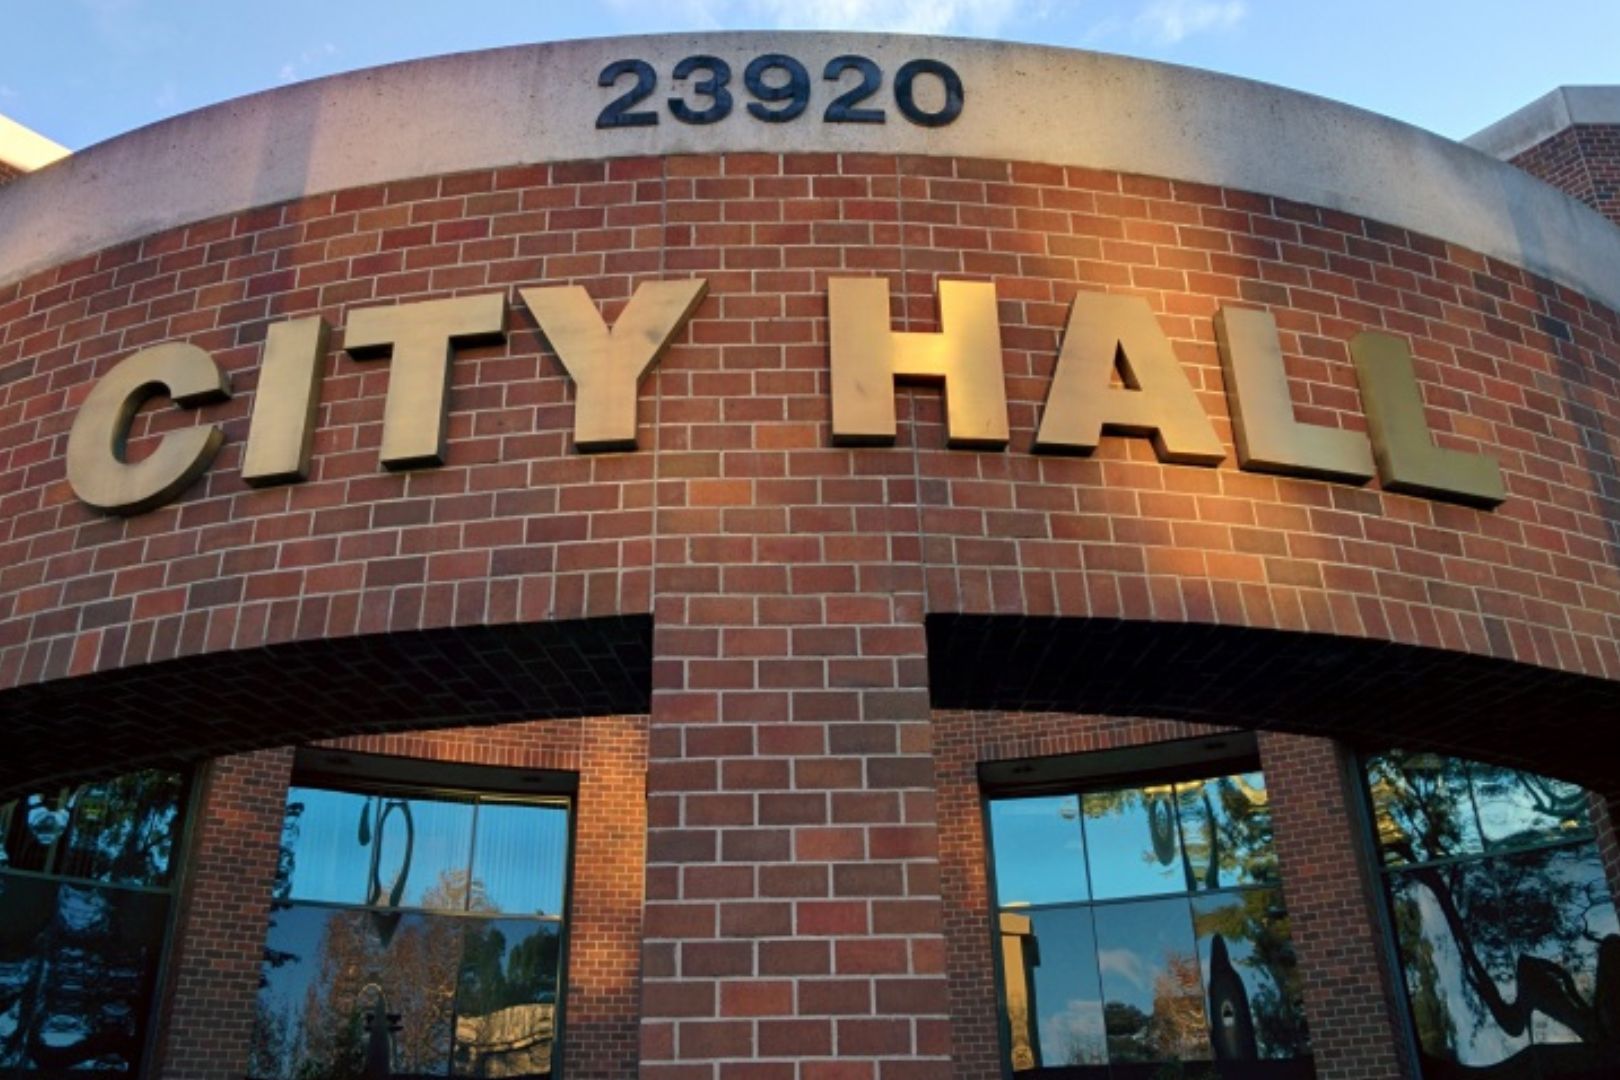 A building that has the city hall sign on it.